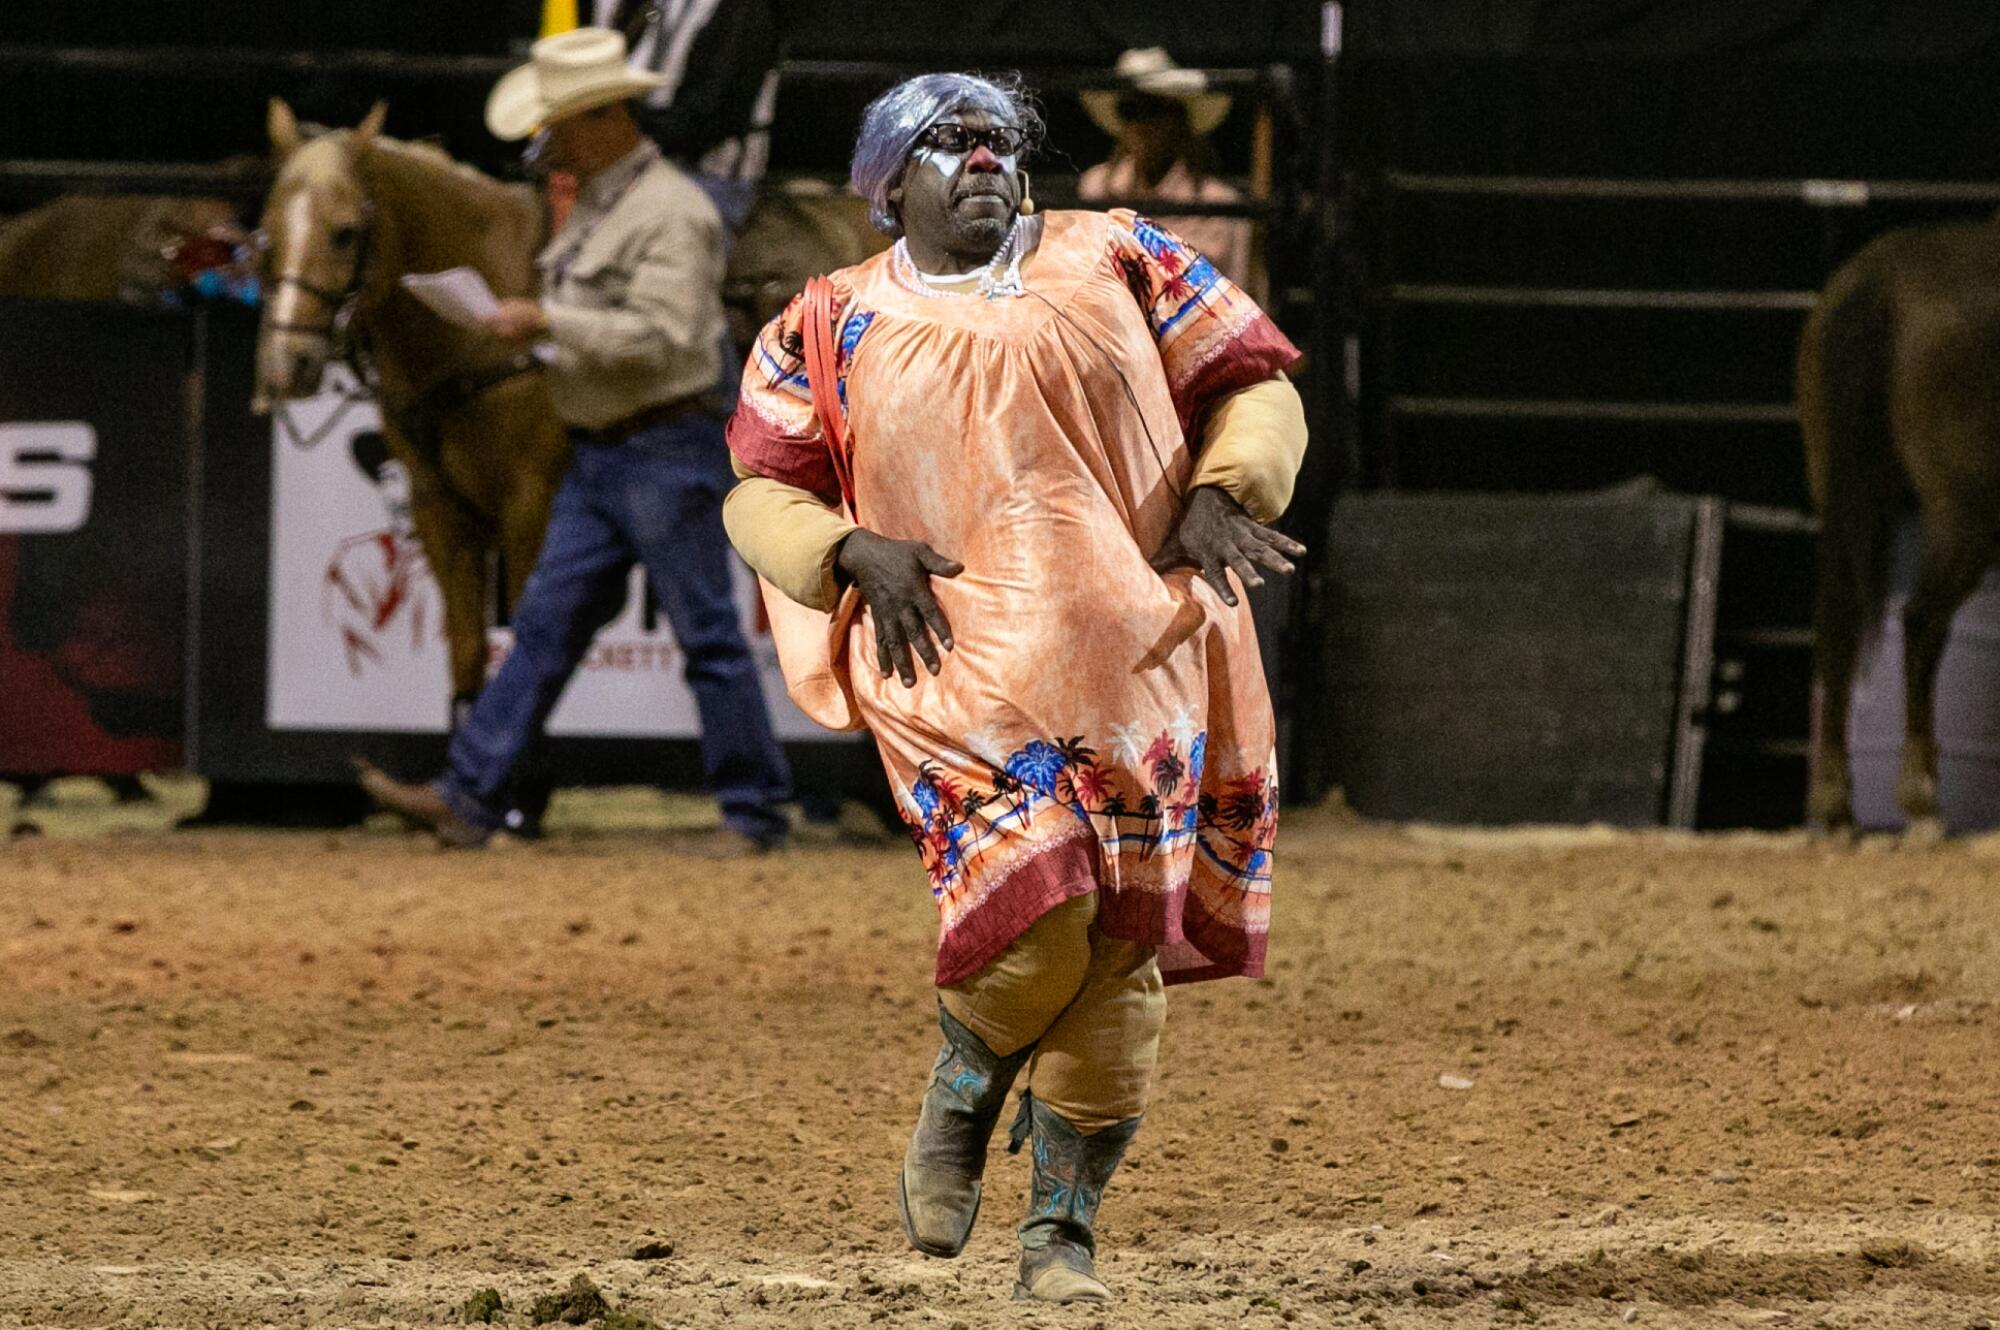 Avery Ford, a rodeo clown who performs as Spanky, entertains the crowd at the Bill Pickett Invitational Rodeo